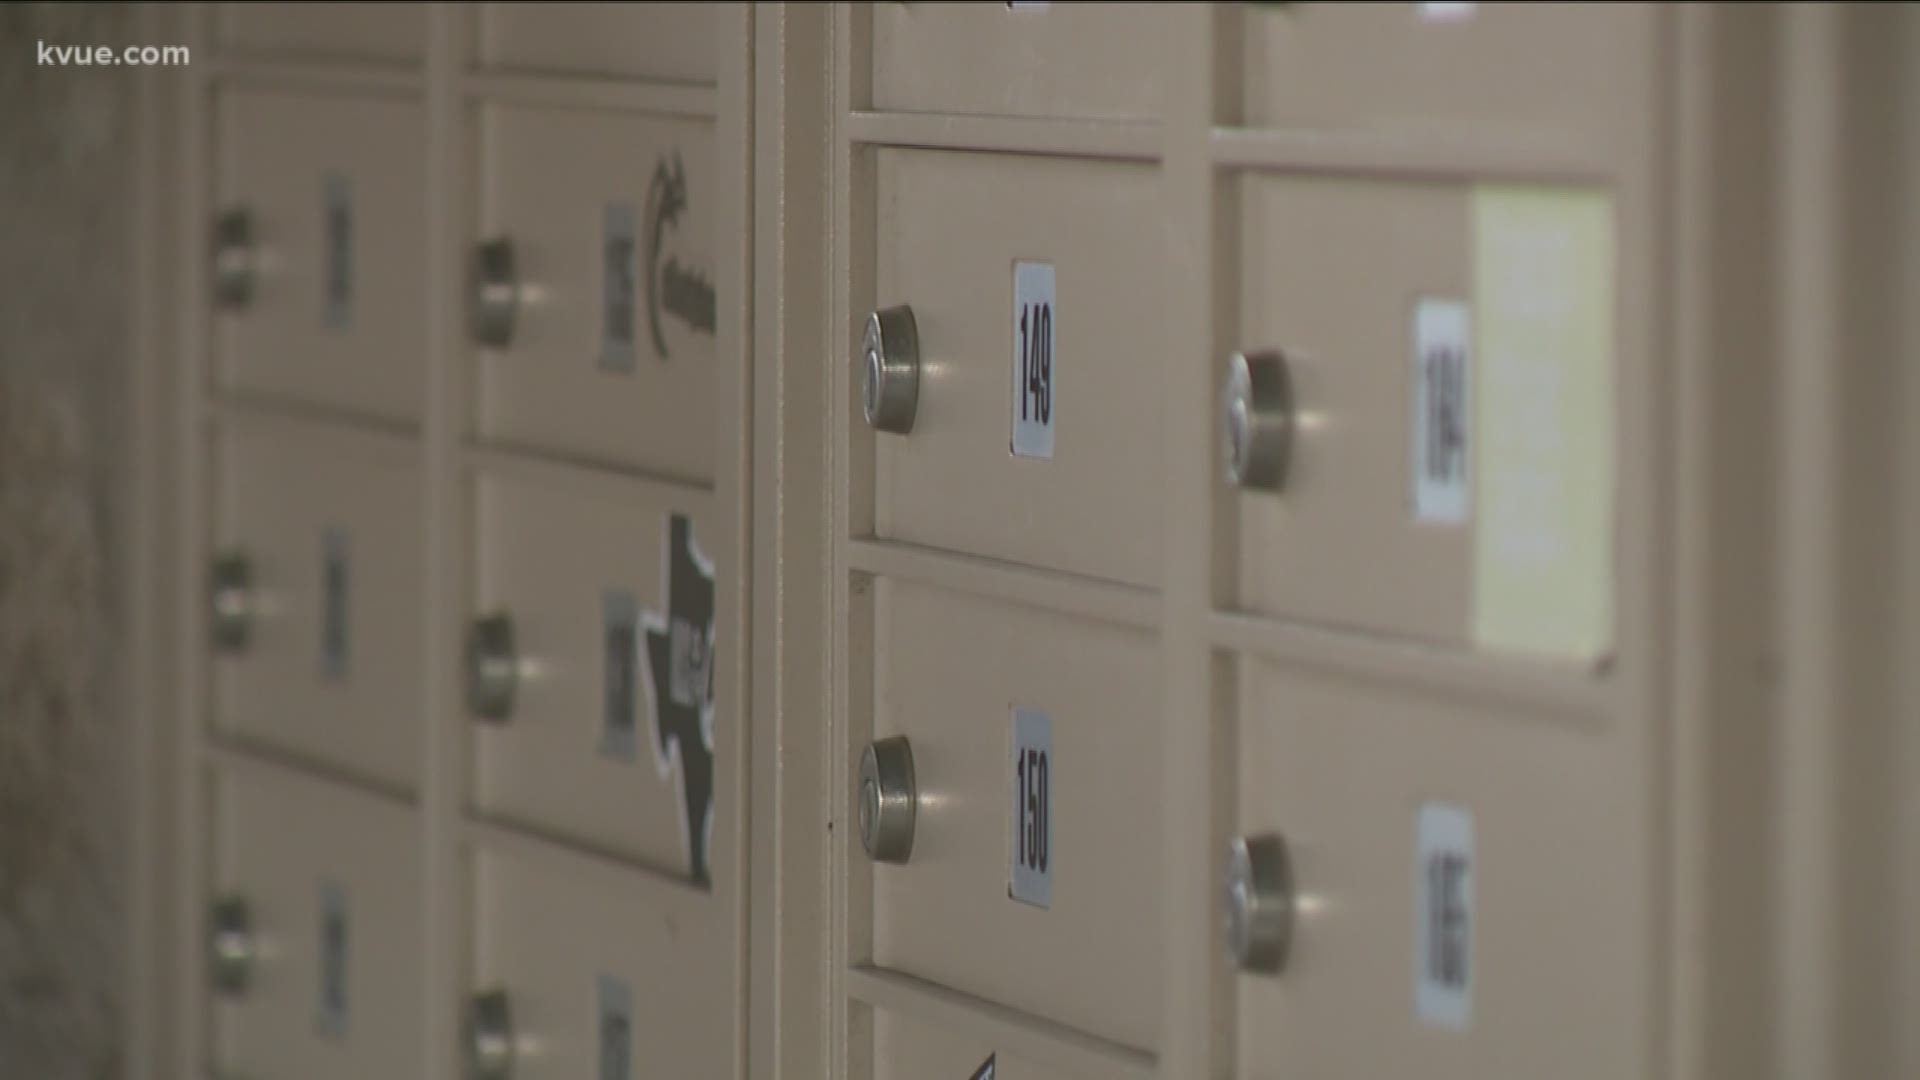 Mail theft in Southwest Austin is affecting more than one community.